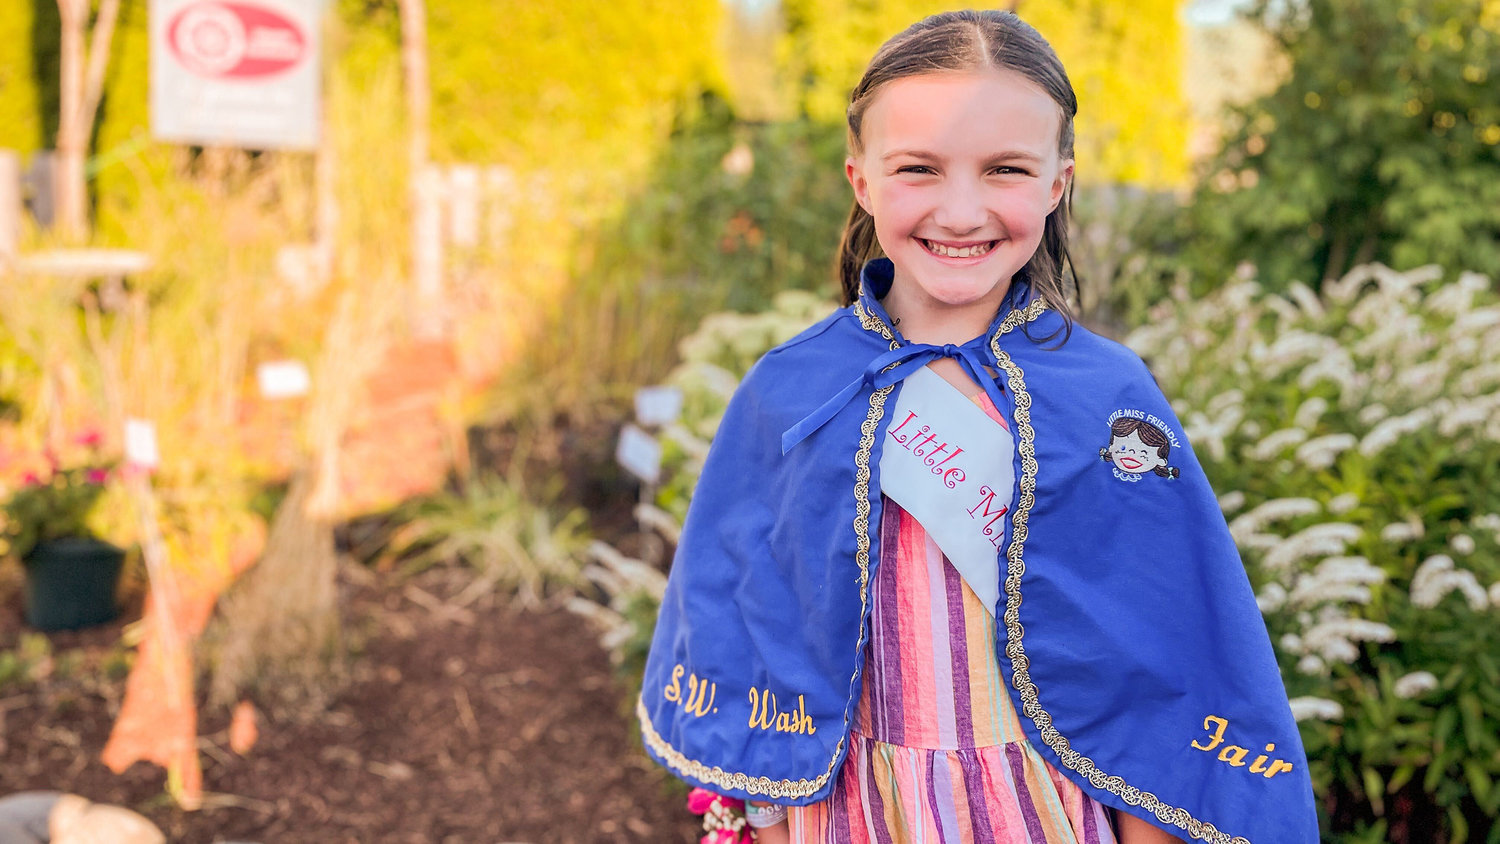 Little Miss Friendly Emma Britton, sporting the iconic cape, smiles for a photo Tuesday at the Southwest Washington Fairgrounds in Centralia.